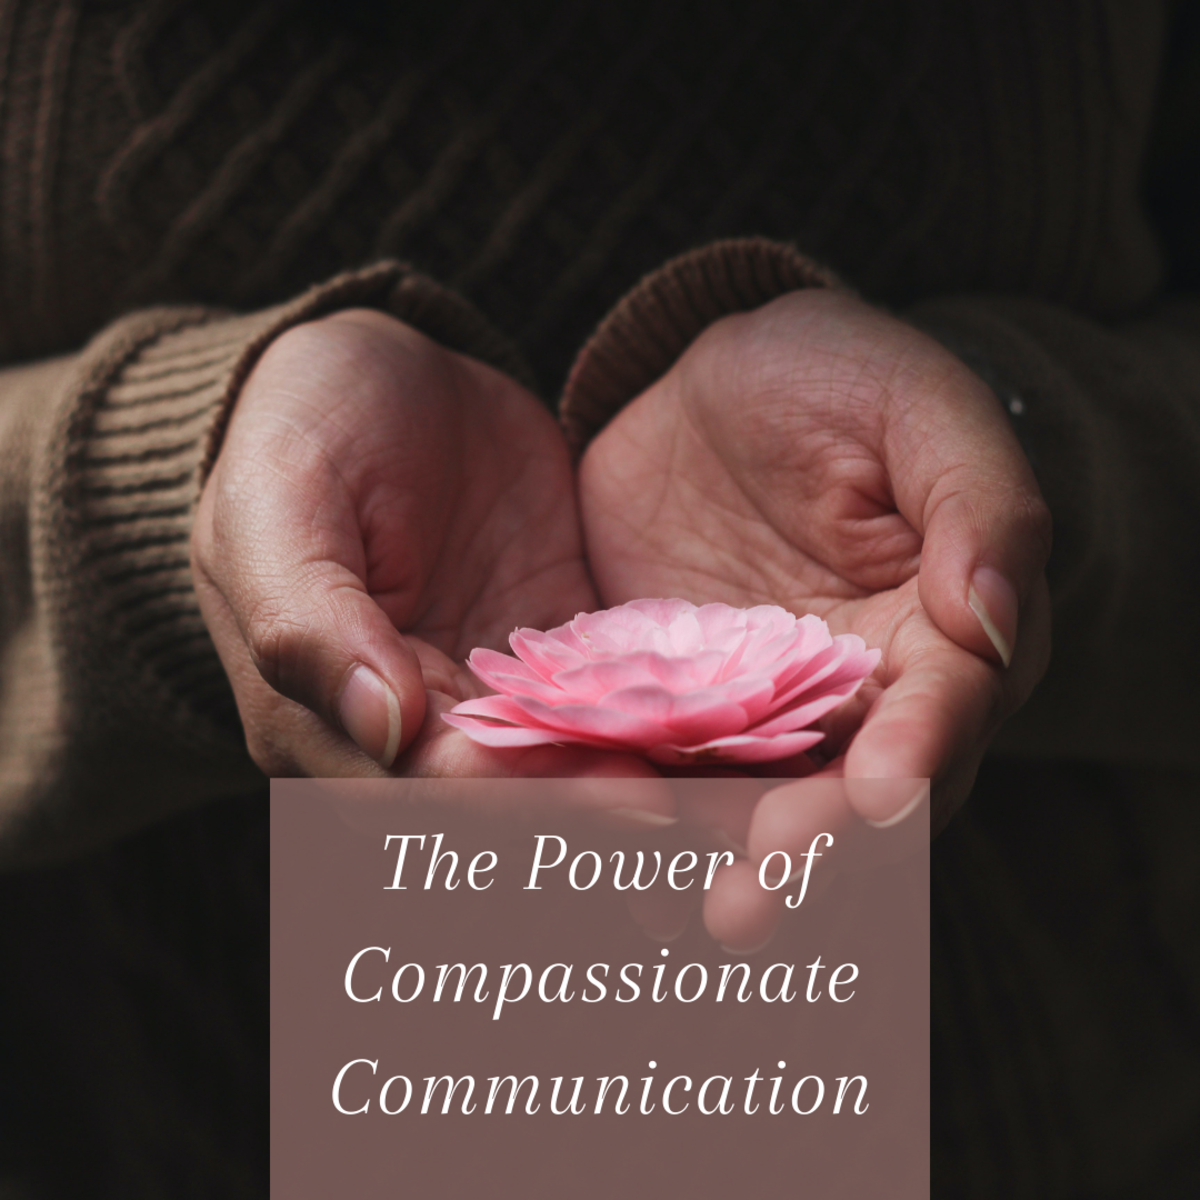 What Is Compassionate Communication?